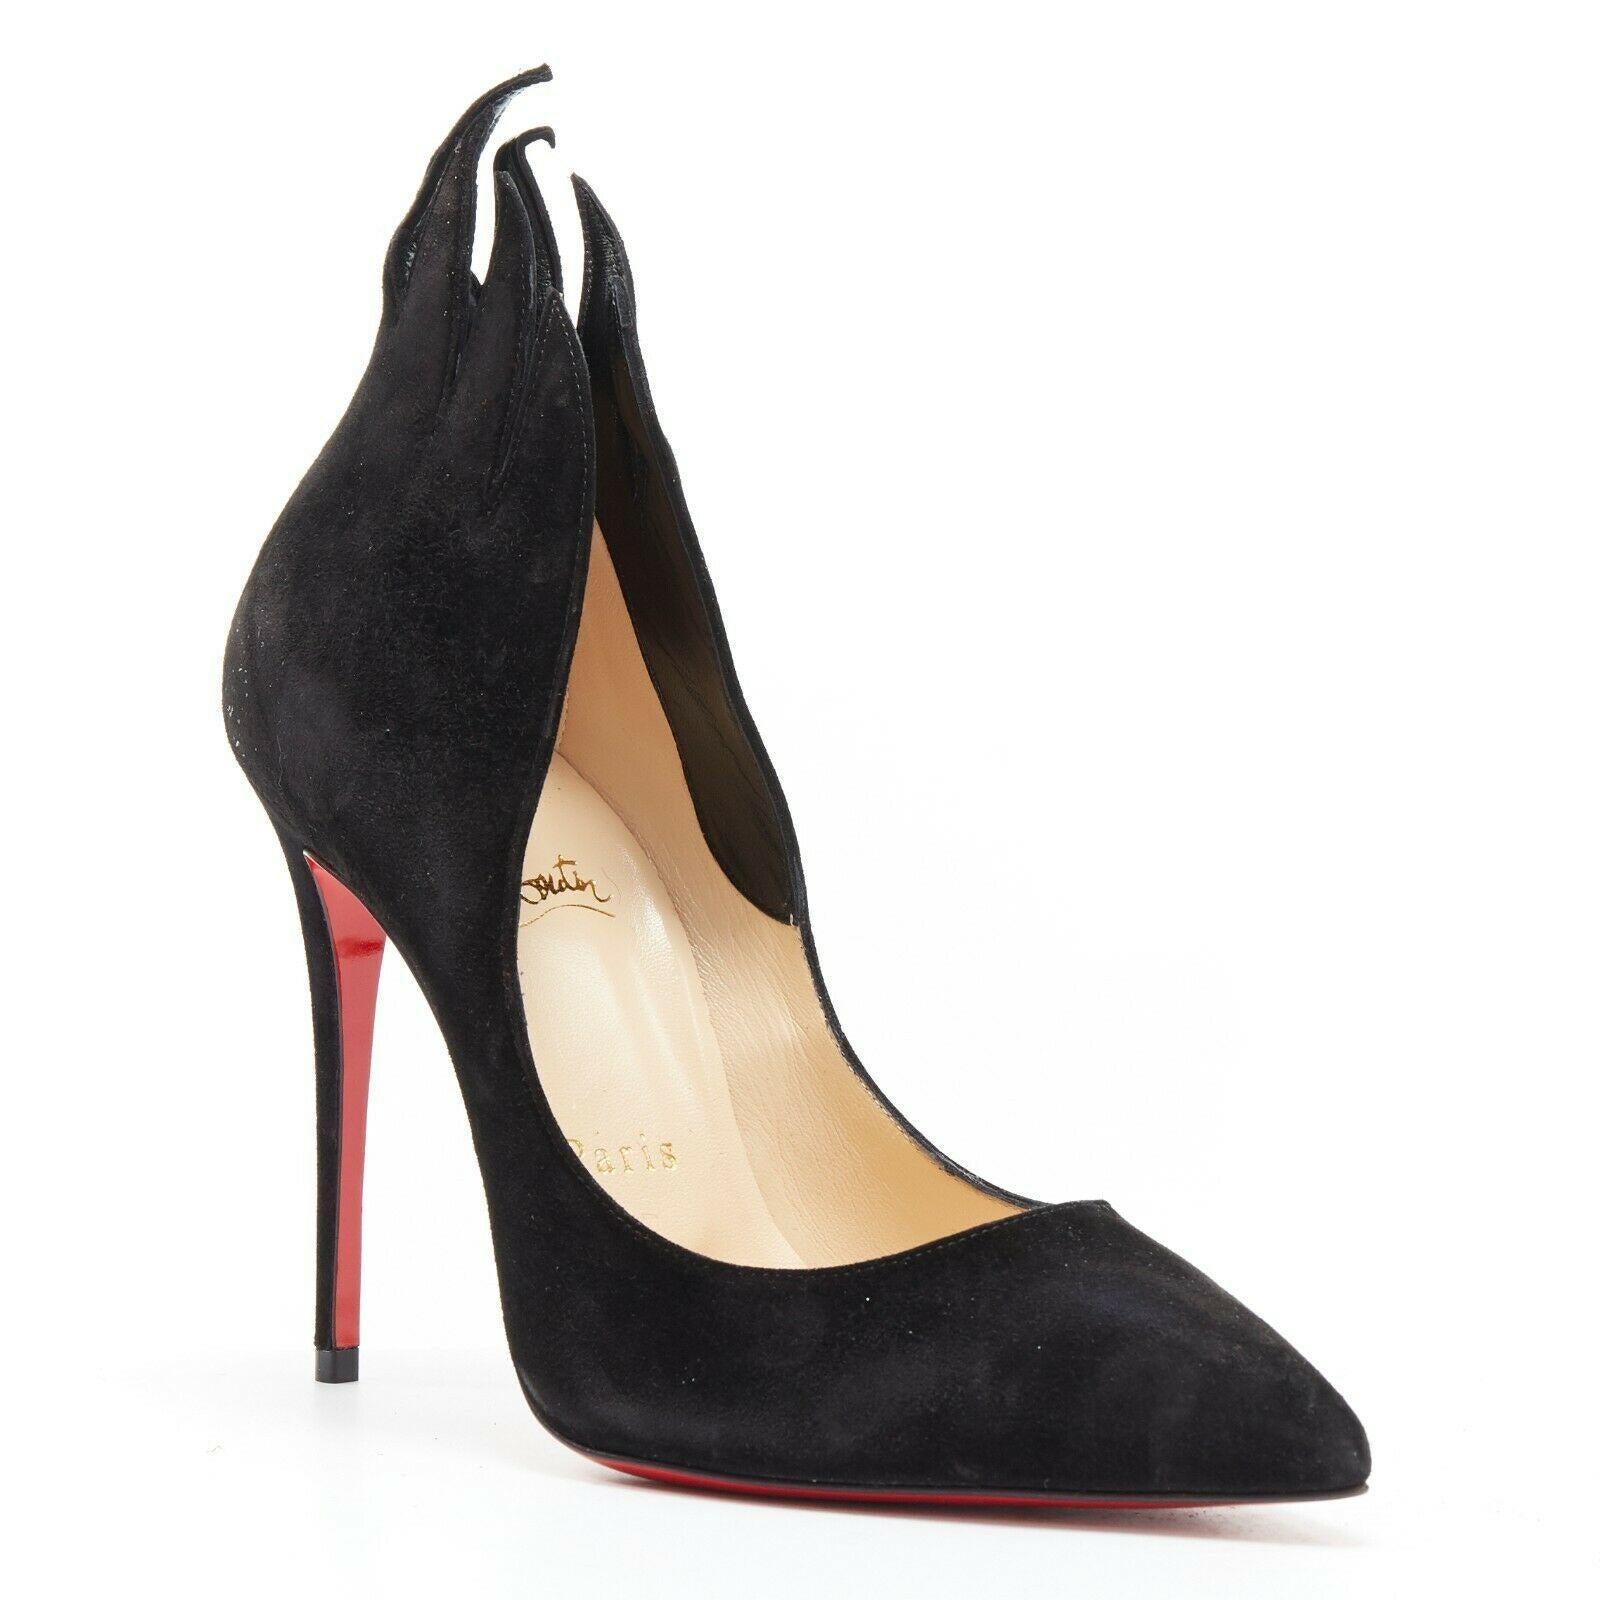 new CHRISTIAN LOUBOUTIN Victorina 100 black suede flame point toe pumps EU36

CHRISTIAN LOUBOUTIN
Victorina 100. Jagged flame-inspired trims cutout topline . Pointed toe. Stiletto heel. Signature Pigalle pumps. Slip on style. Tan leather lining and